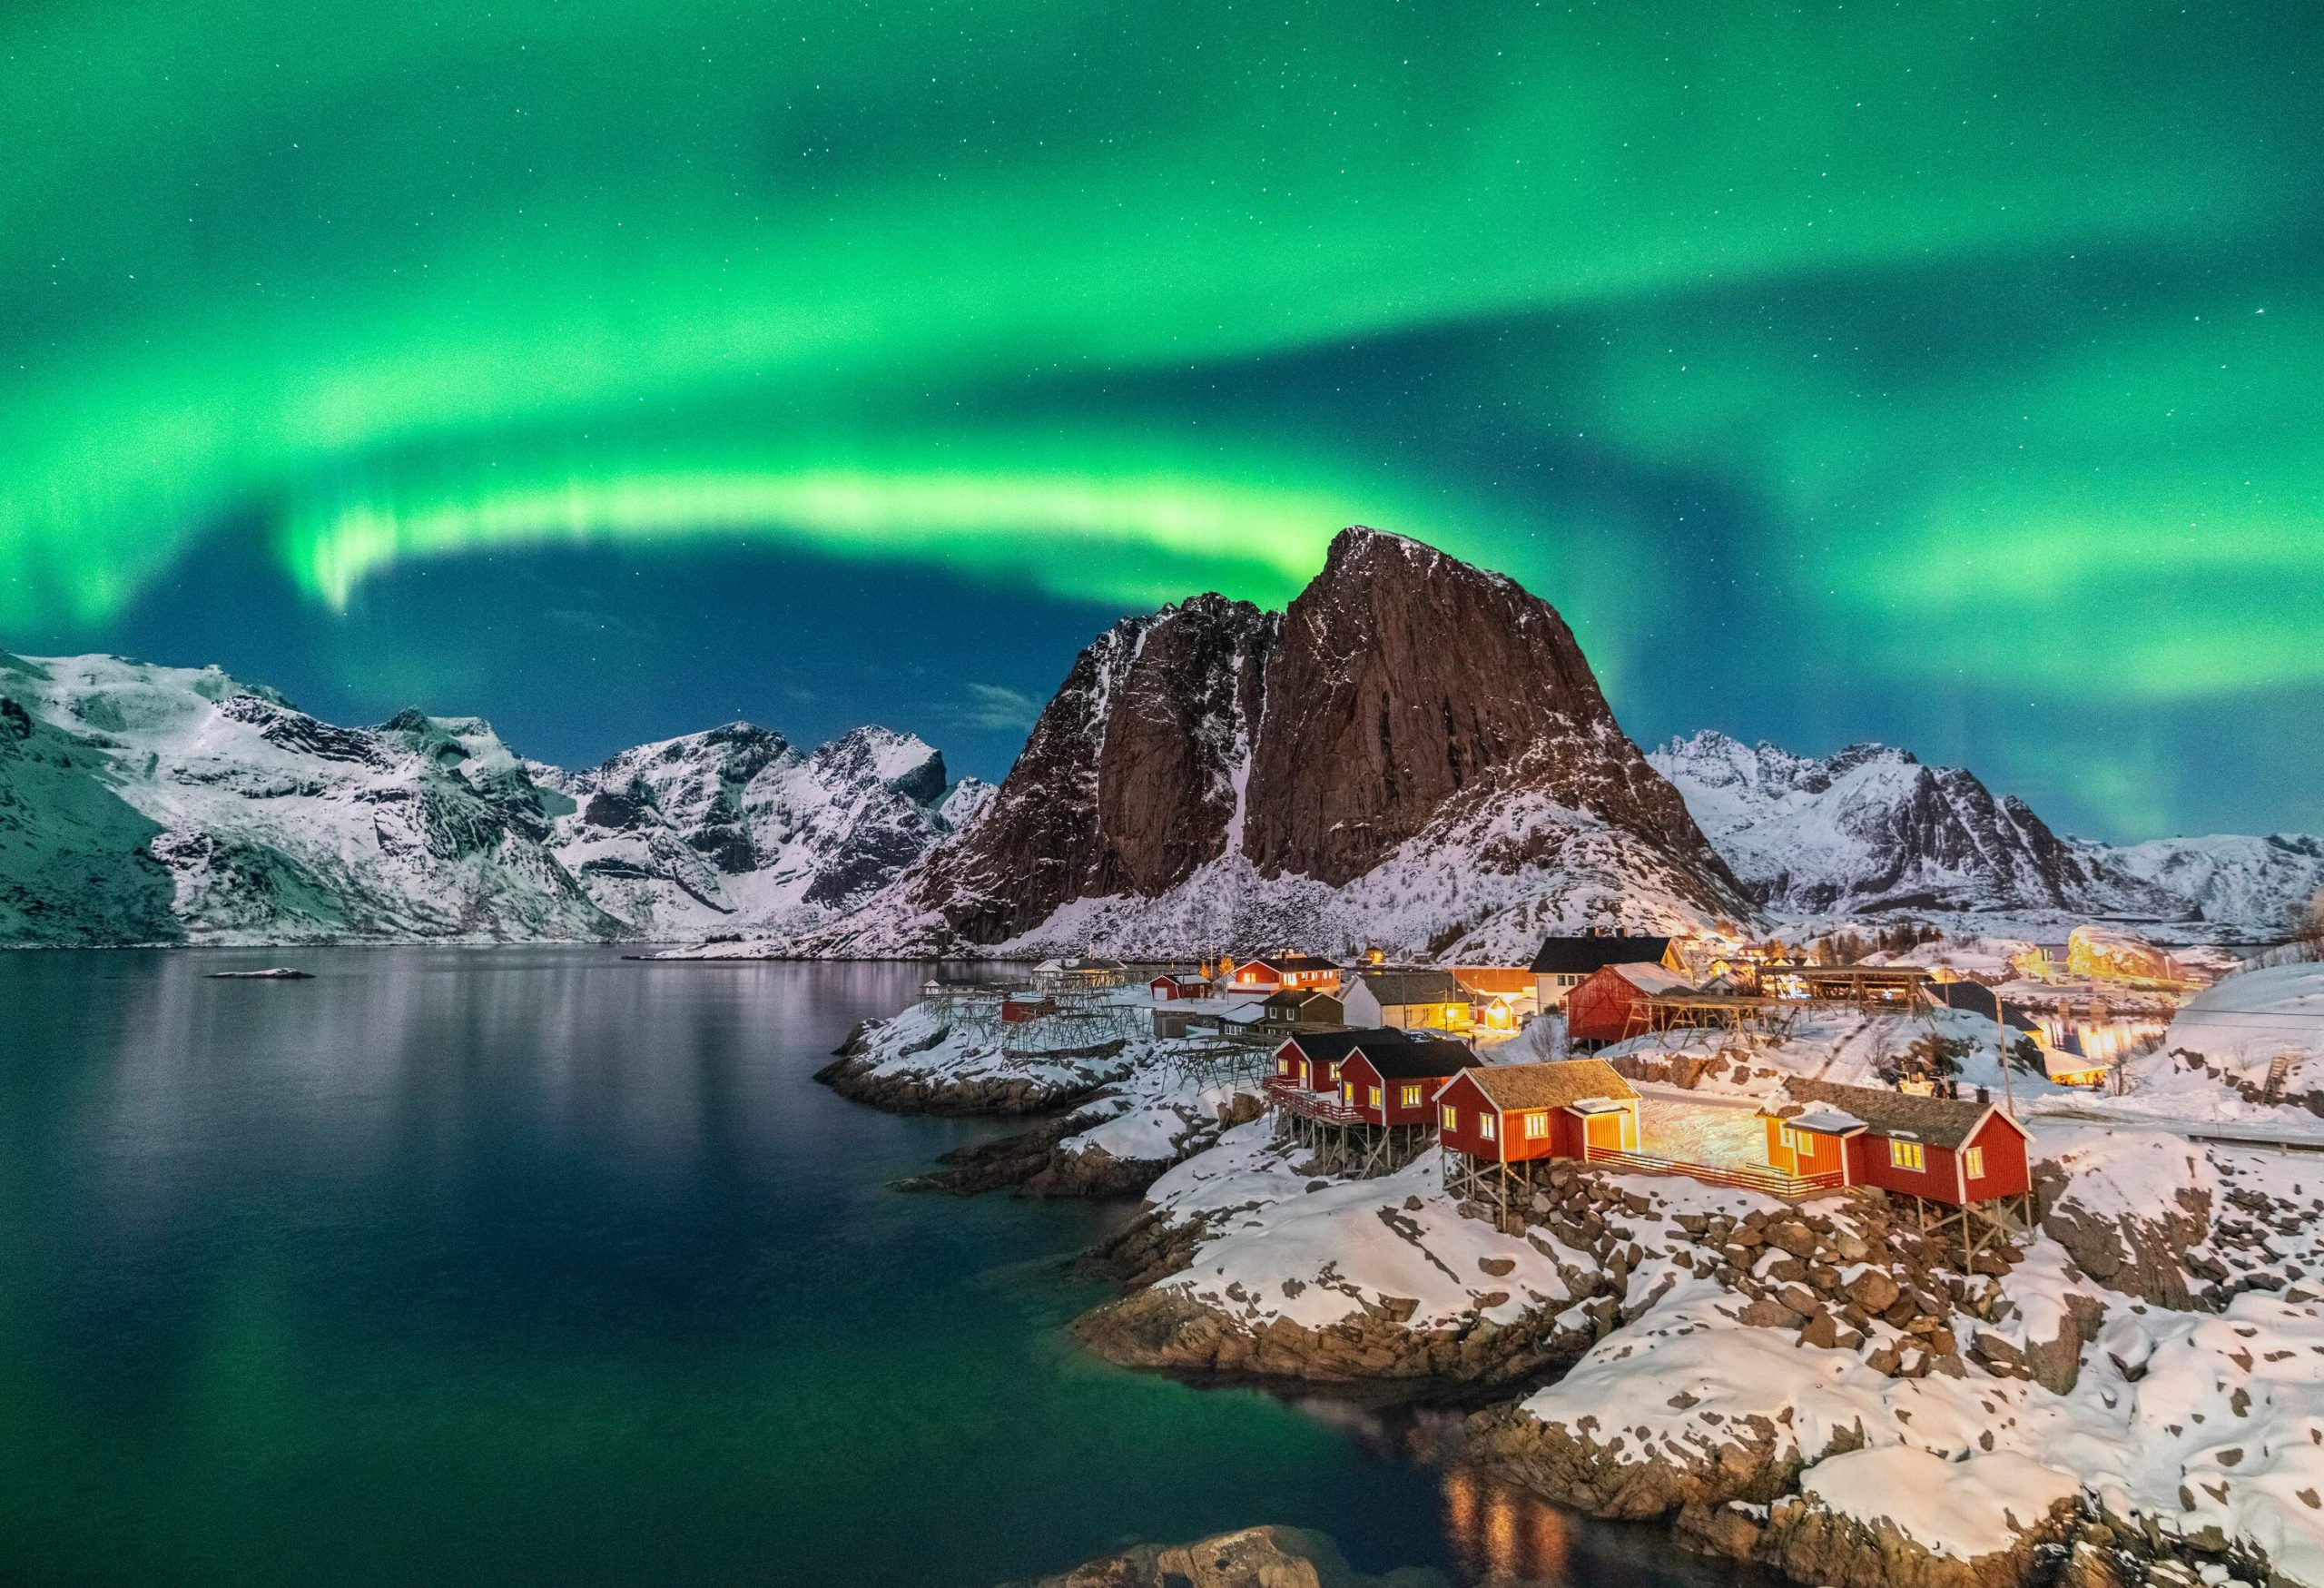 The dazzling Northern lights colour the sky green and blue over a small village along the lake bounded by steep rocks.